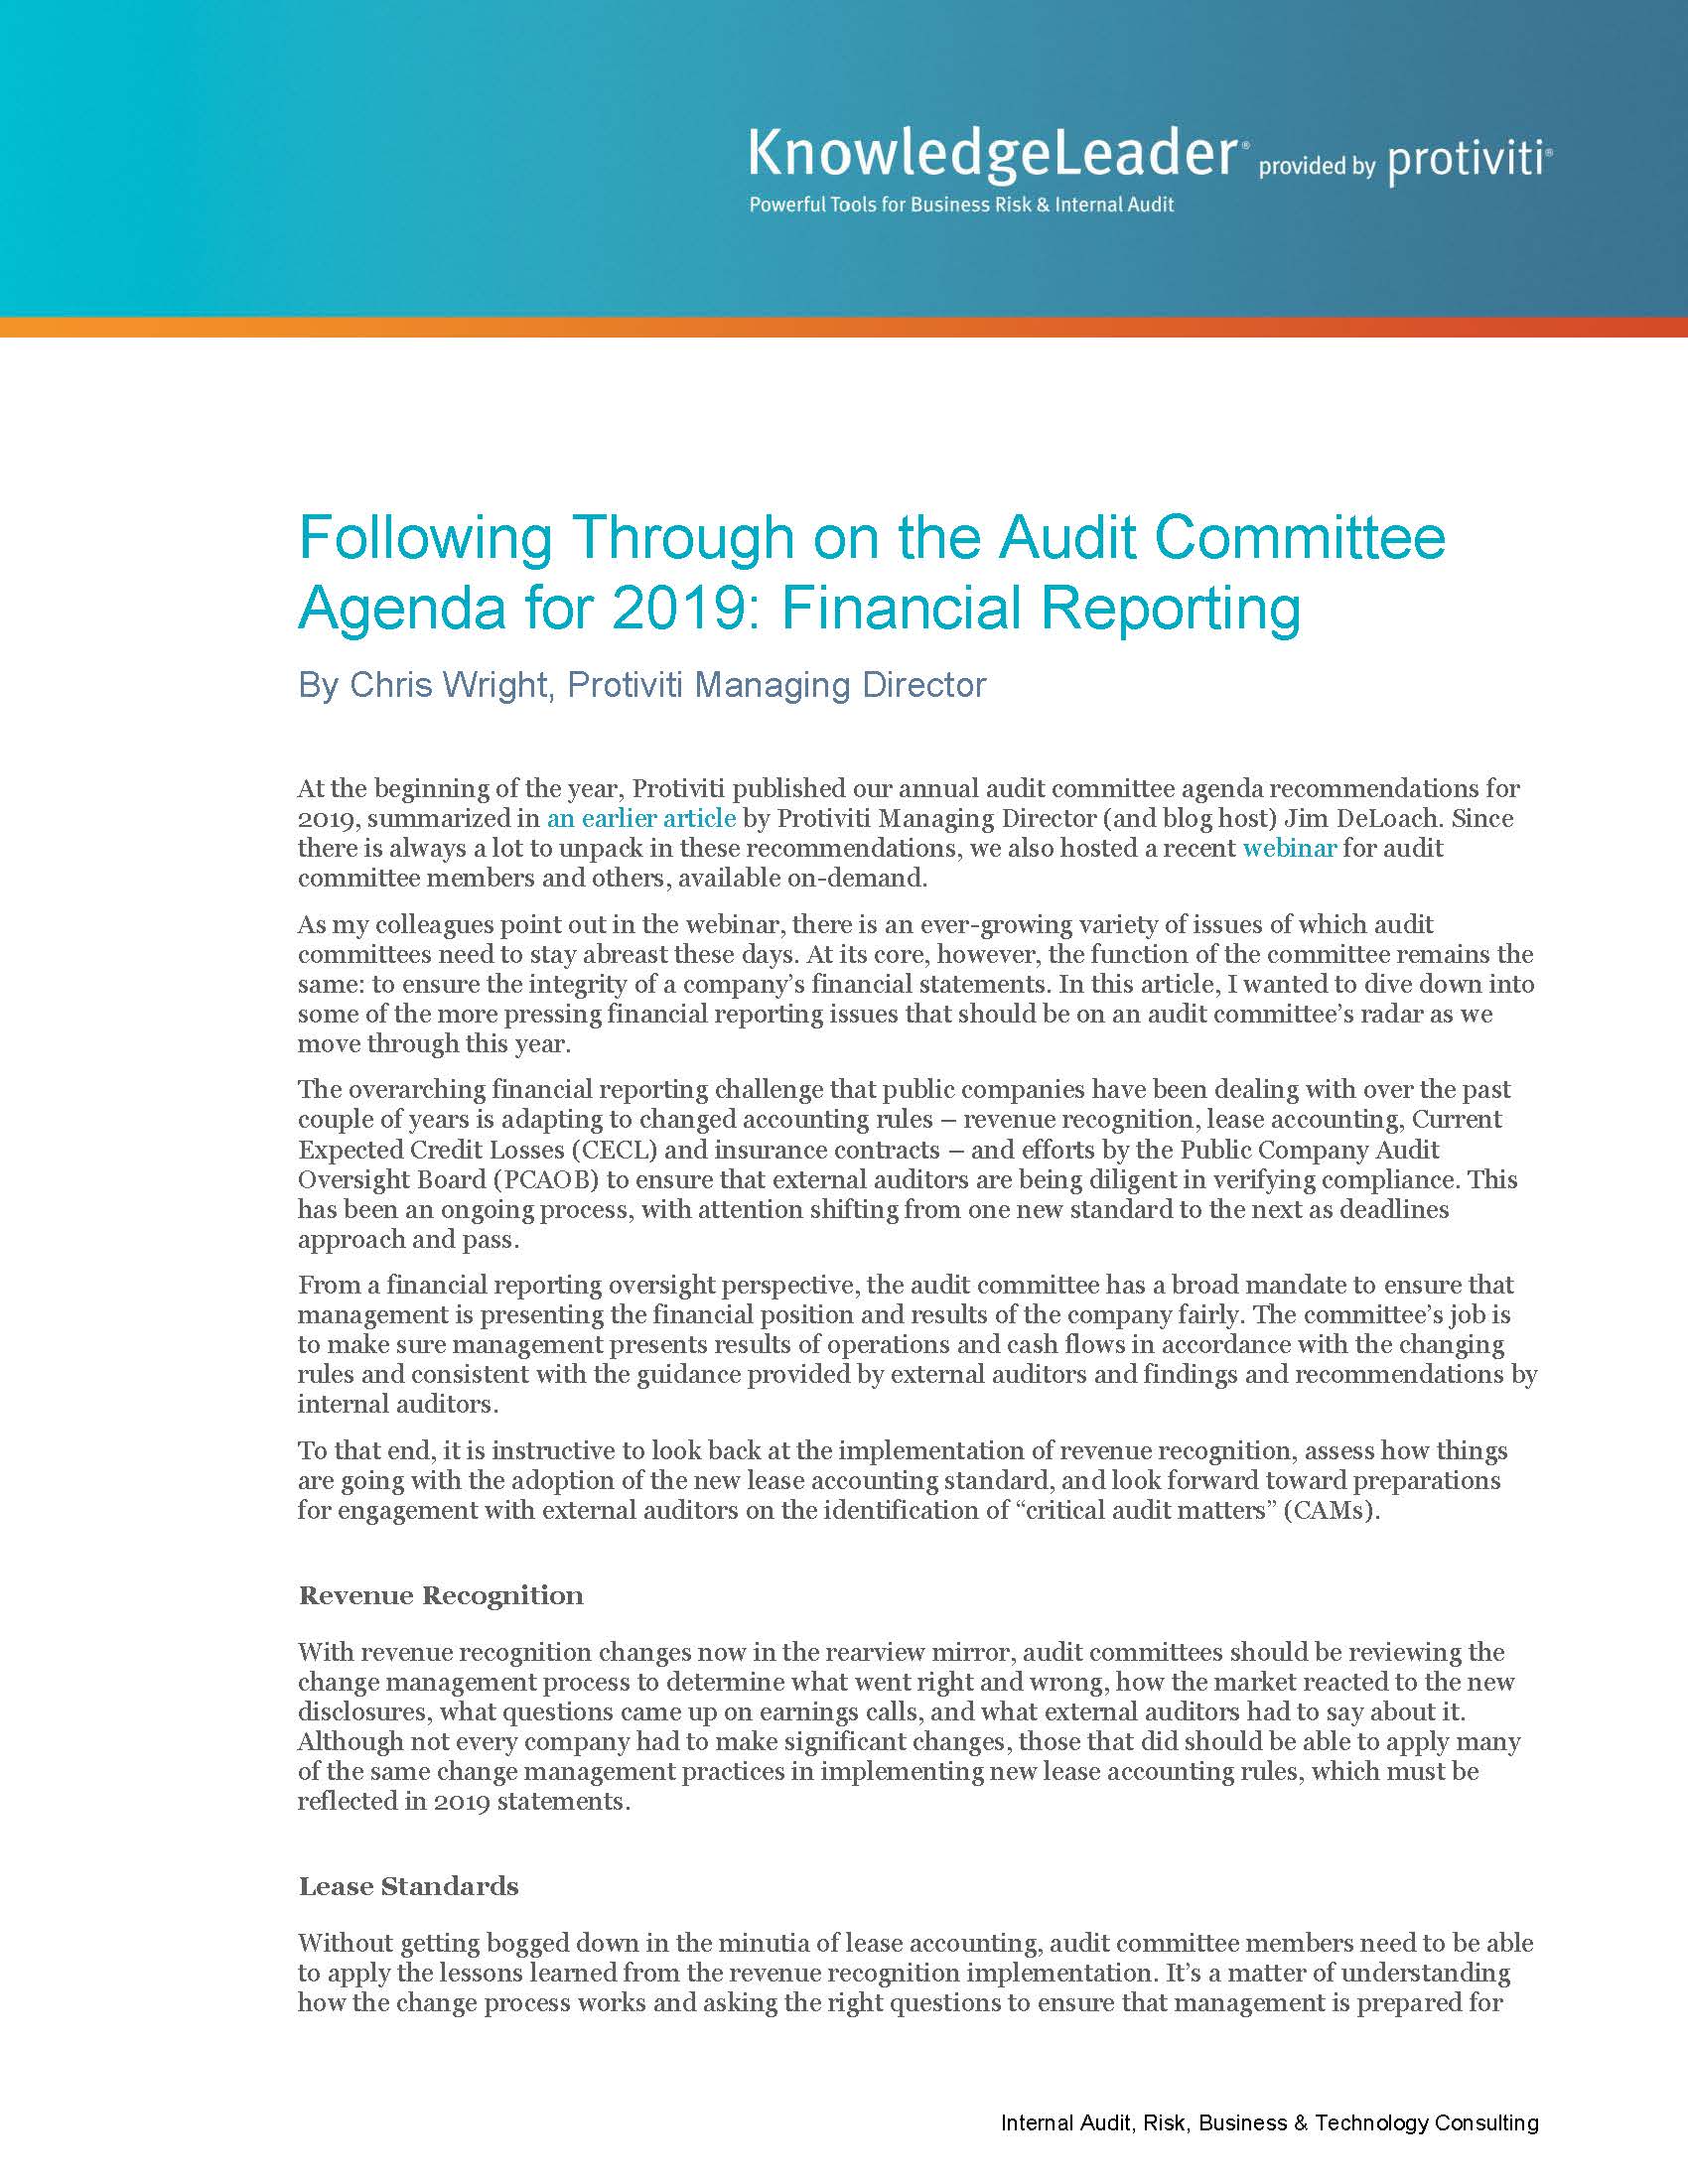 Screenshot of the first page of Following Through on the Audit Committee Agenda for 2019 Financial Reporting